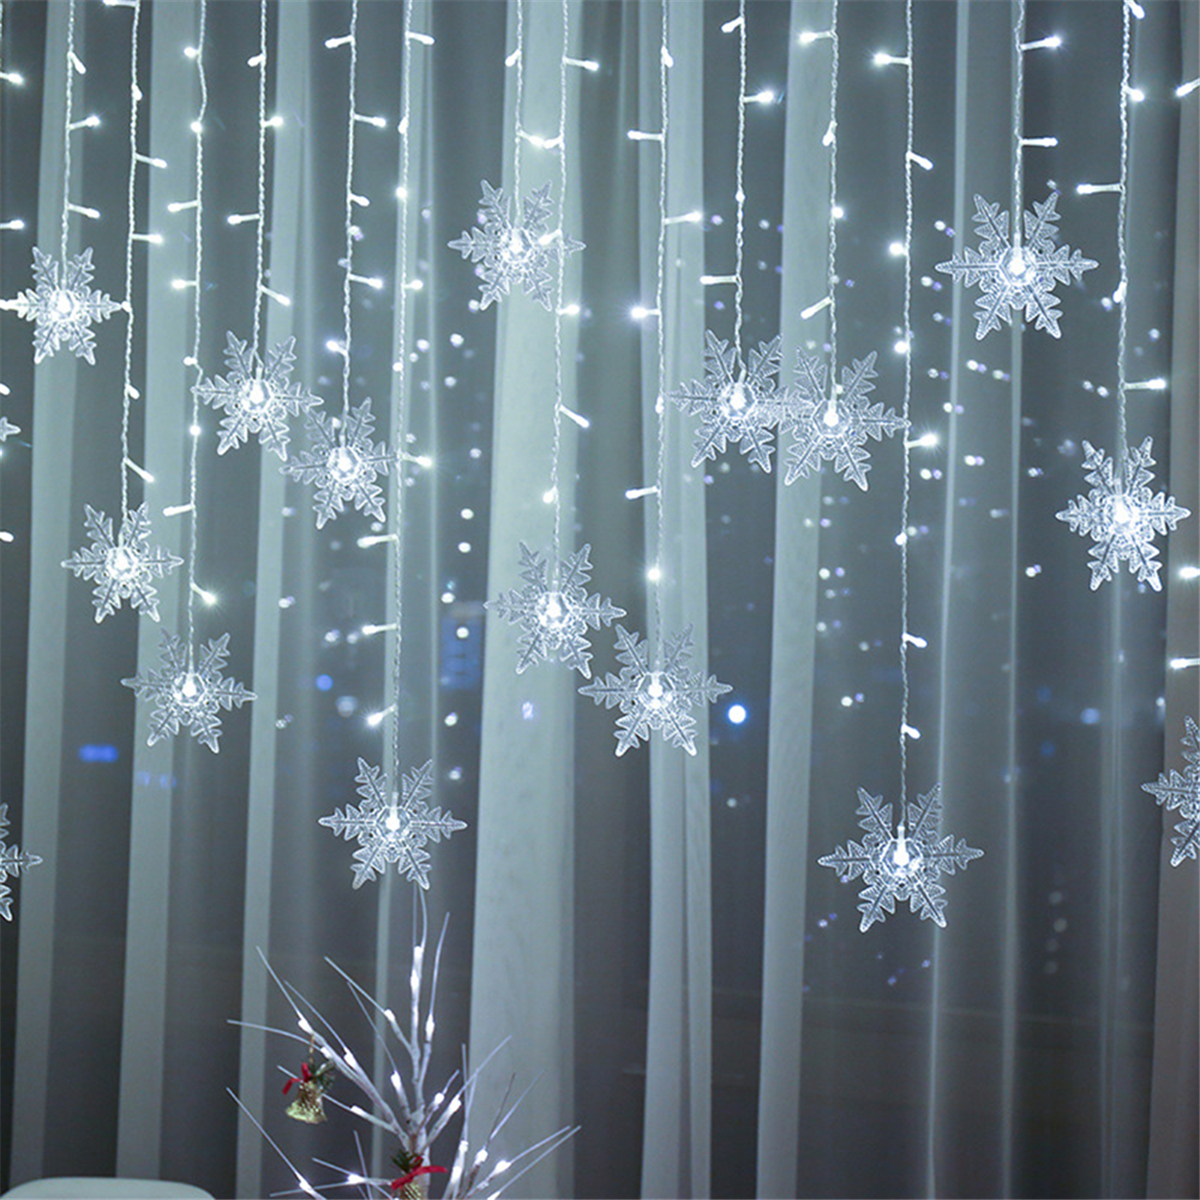 96-LED-Snowflake-String-Curtain-Window-Lights-Colorful-Wedding-Lamp-8-Modes-1817206-4